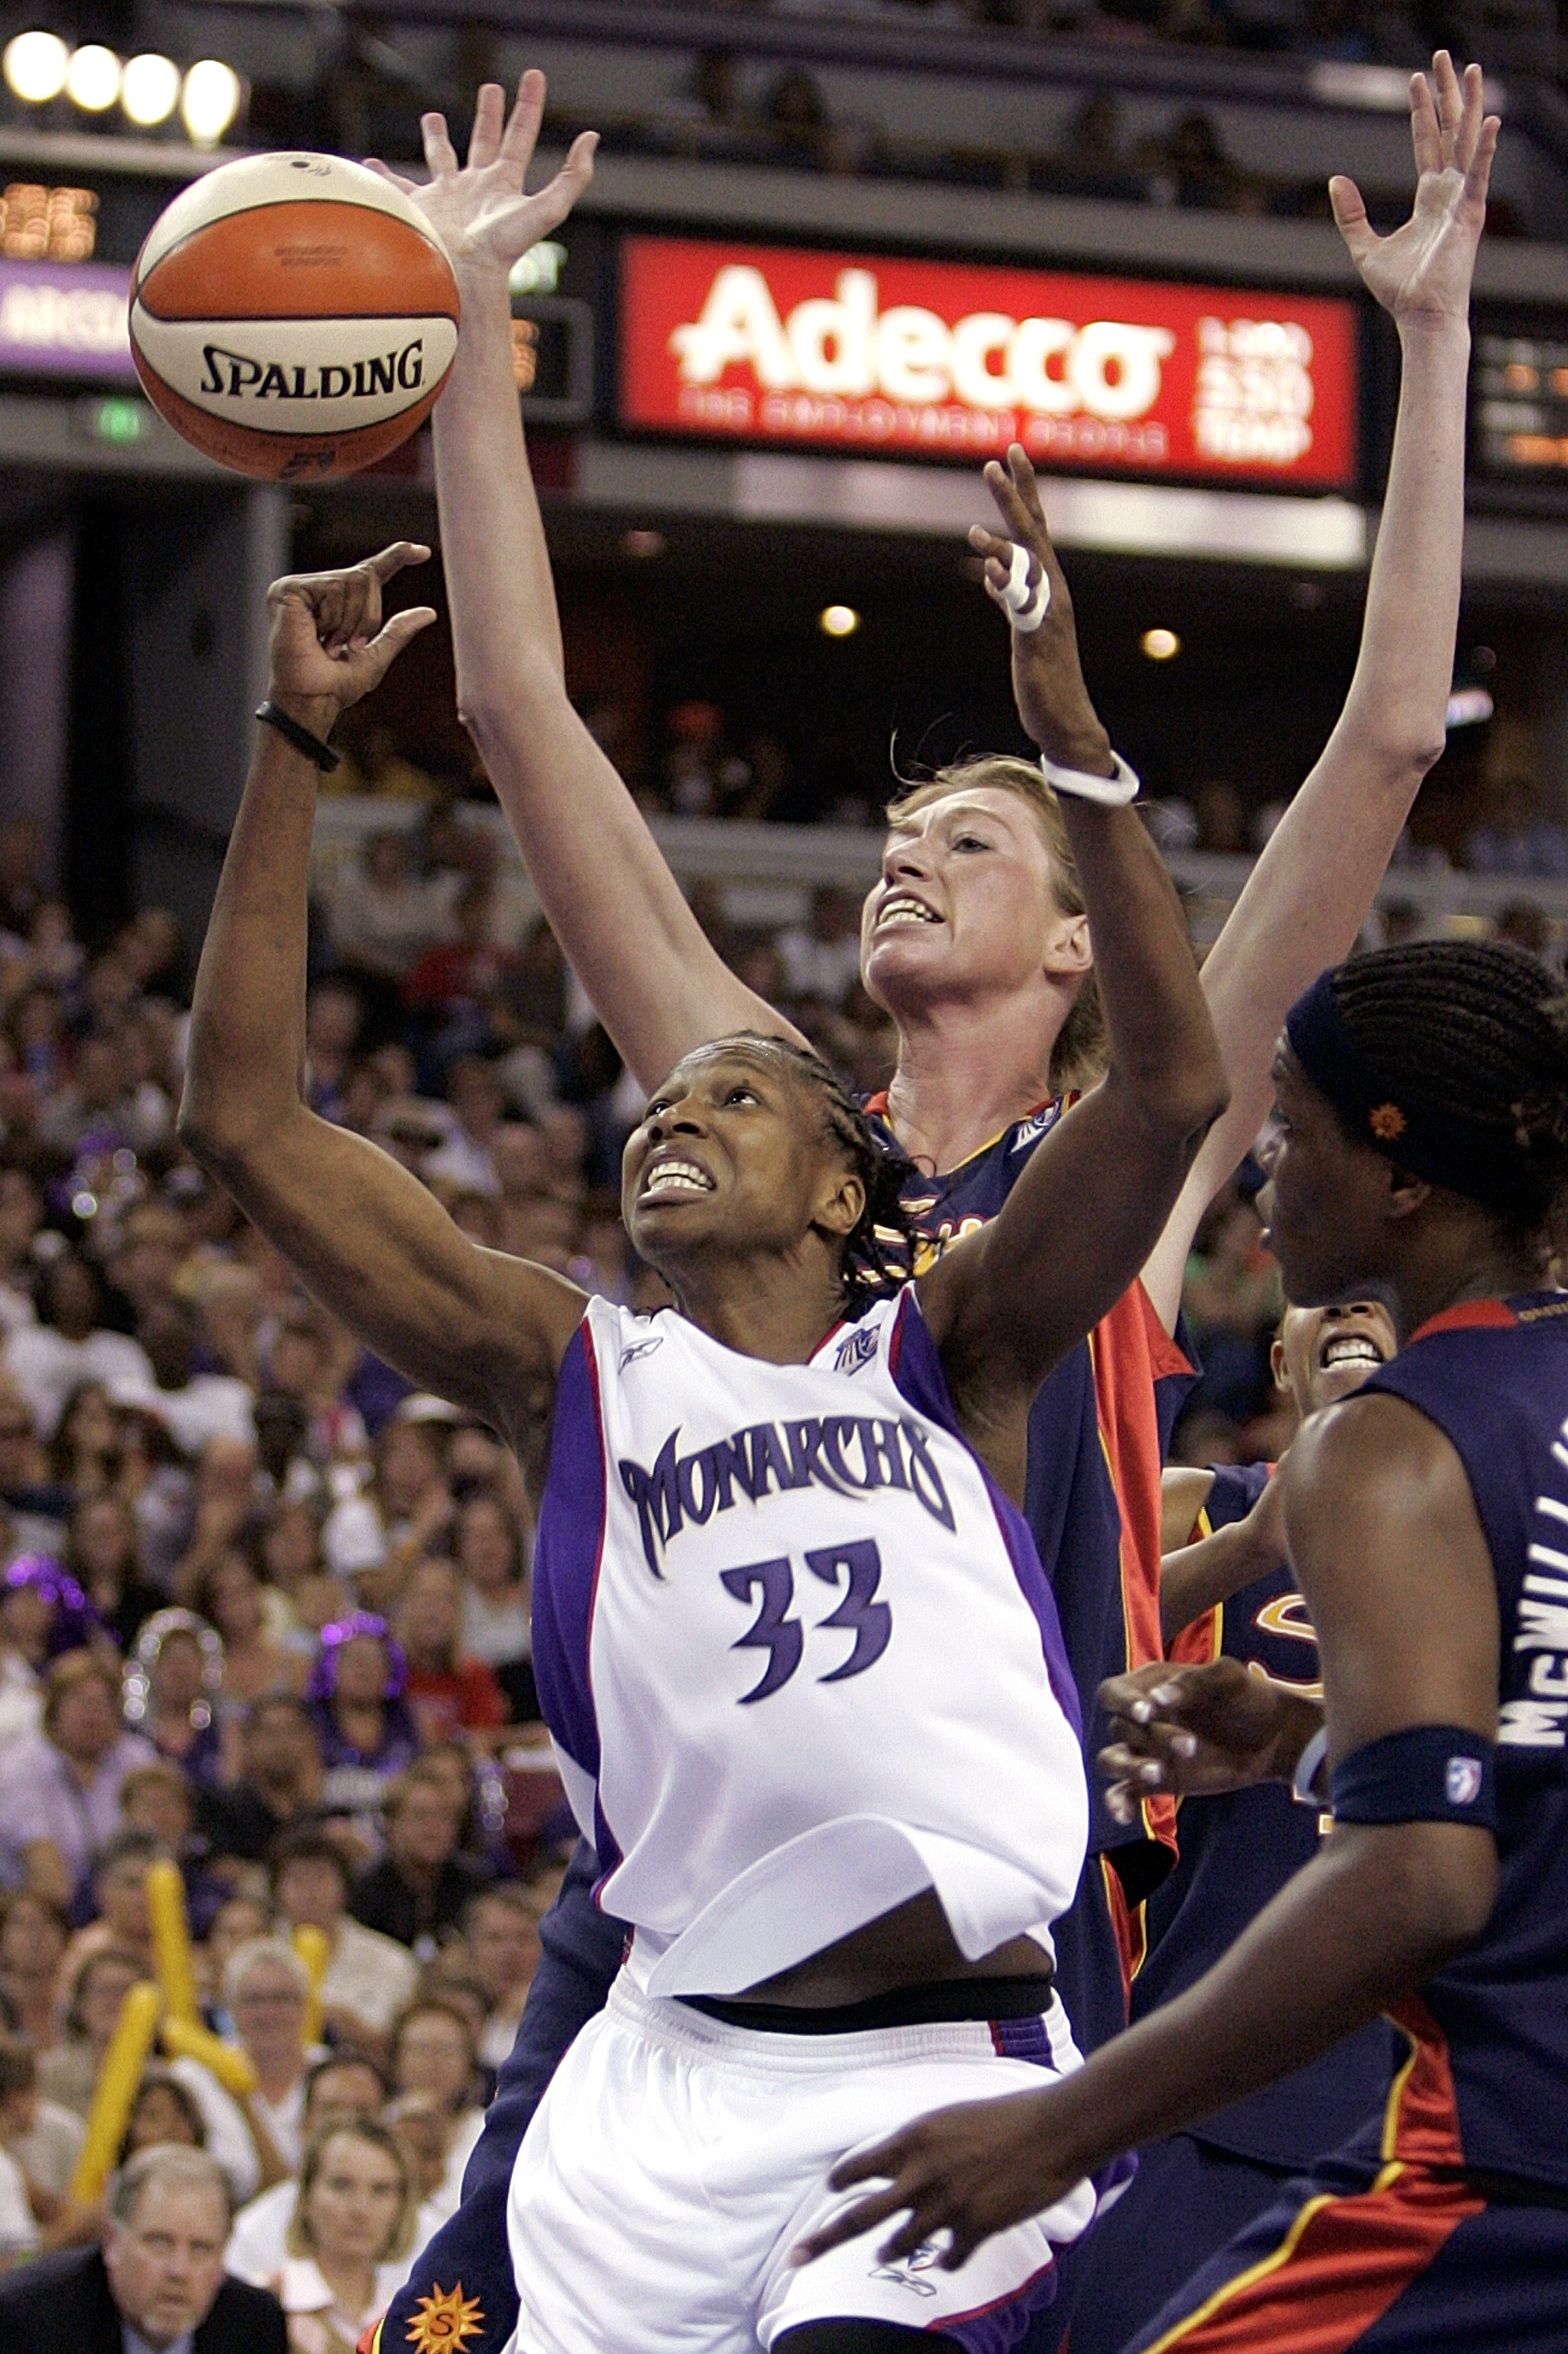 SACRAMENTO, CA - SEPTEMBER 18:   Yolanda Griffith #33 of the Sacramento Monarchs battles with Taj McWilliams-Fran #11 and Margo Dydek #12 of the Connecticut Sun during Game 3 of the WNBA finals on September 18, 2005 at the ARCO Arena in Sacramento, Califo